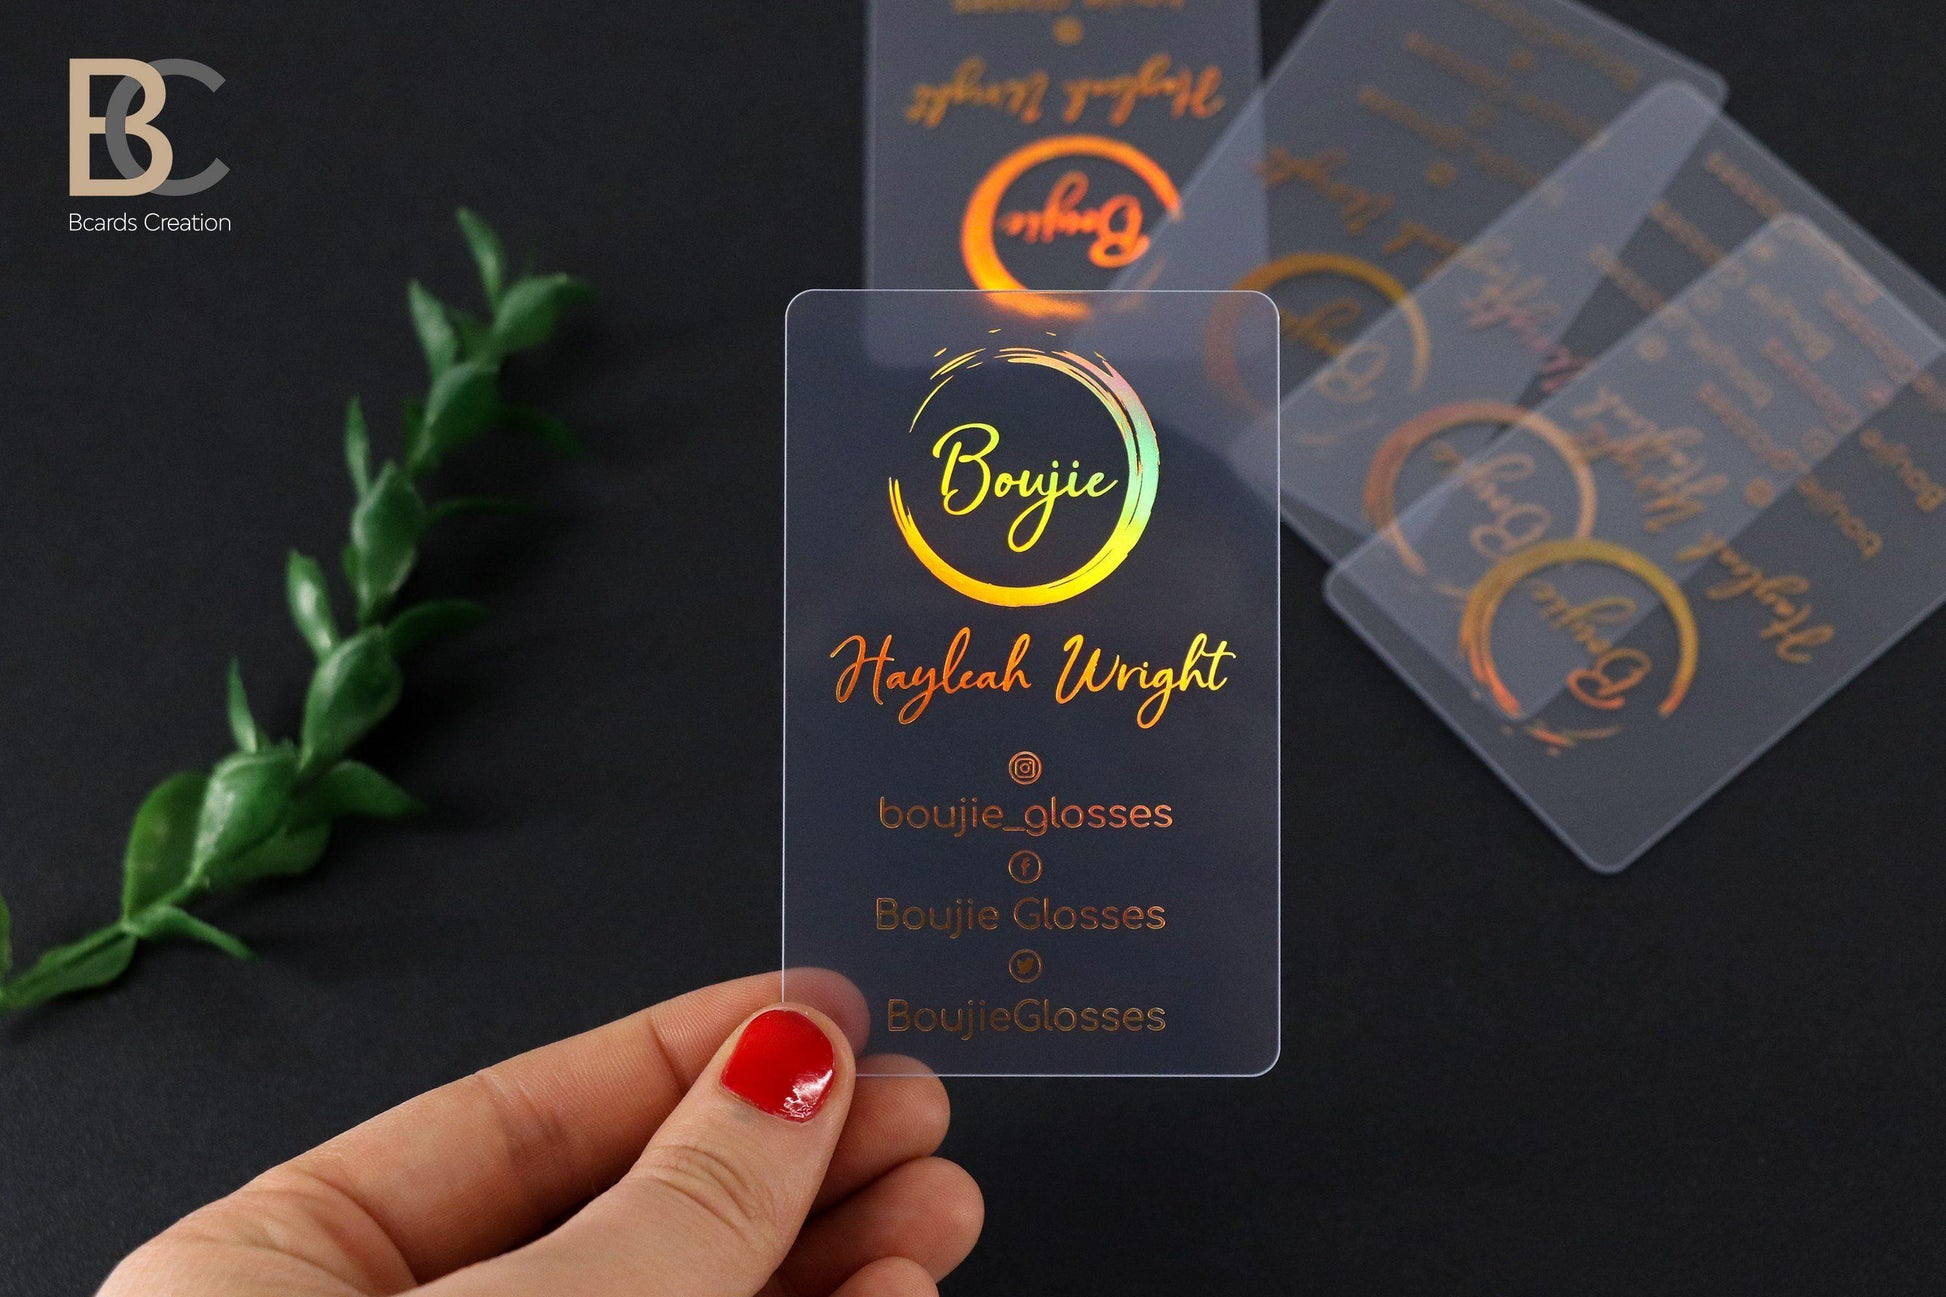 Clear Transparent Business Cards | Real Foil Stamping Cards BcardsCreation